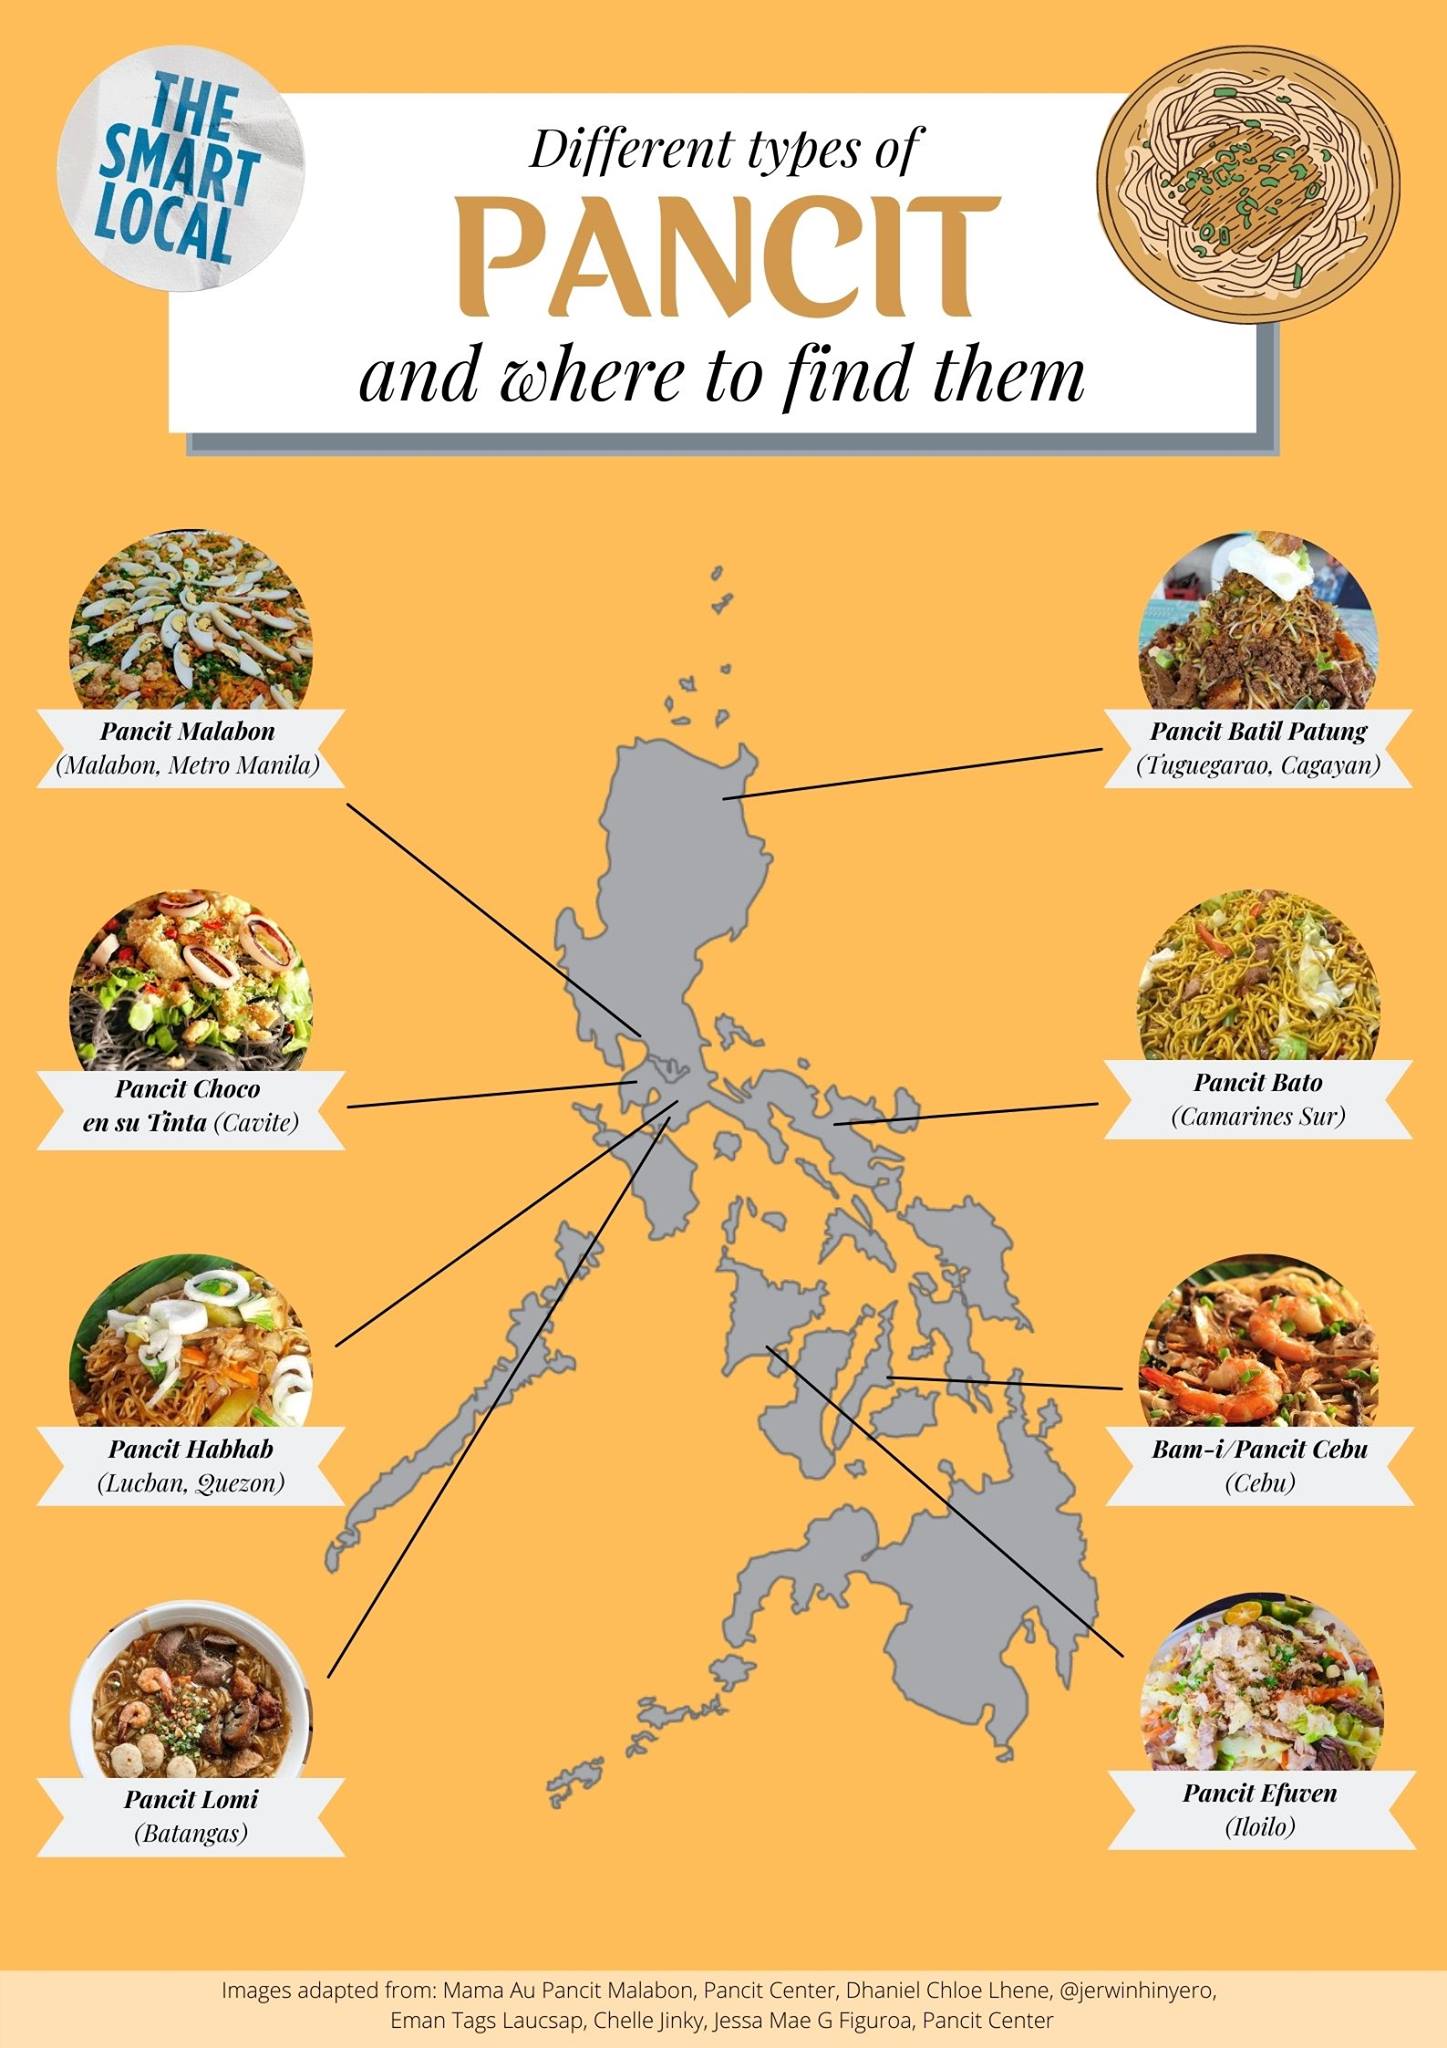 pancit types in the philippines